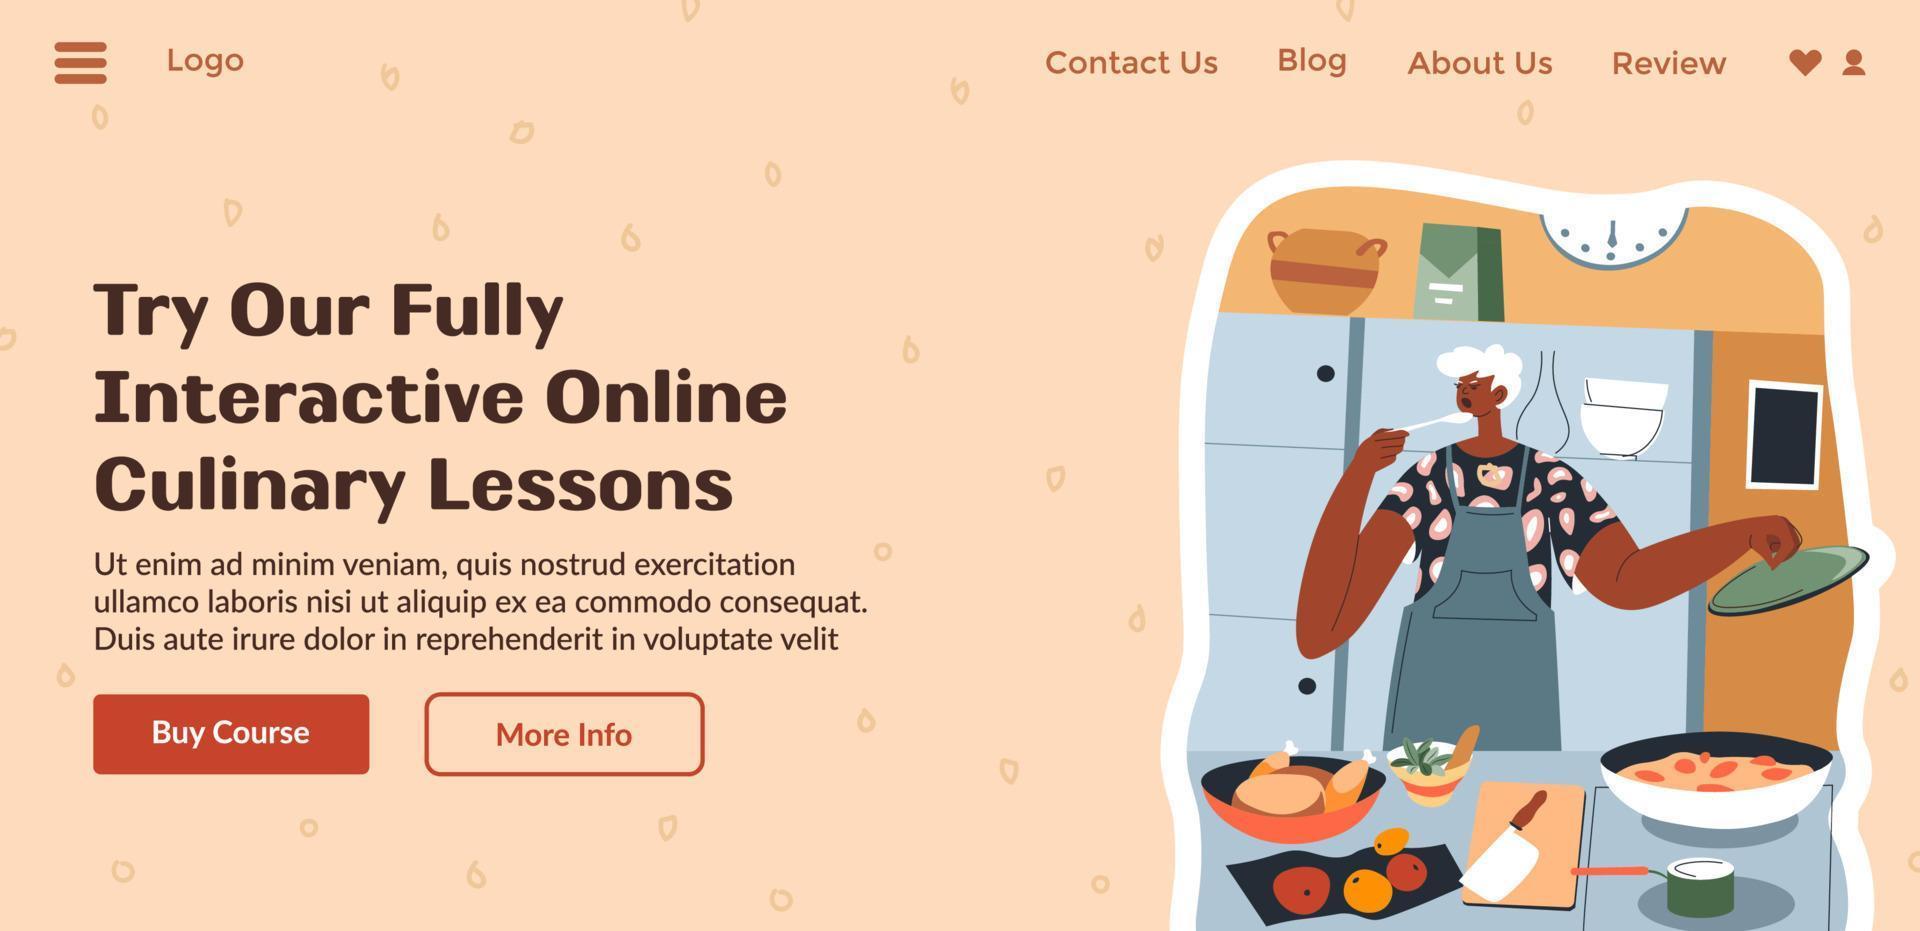 Try our fully interactive online culinary lessons vector